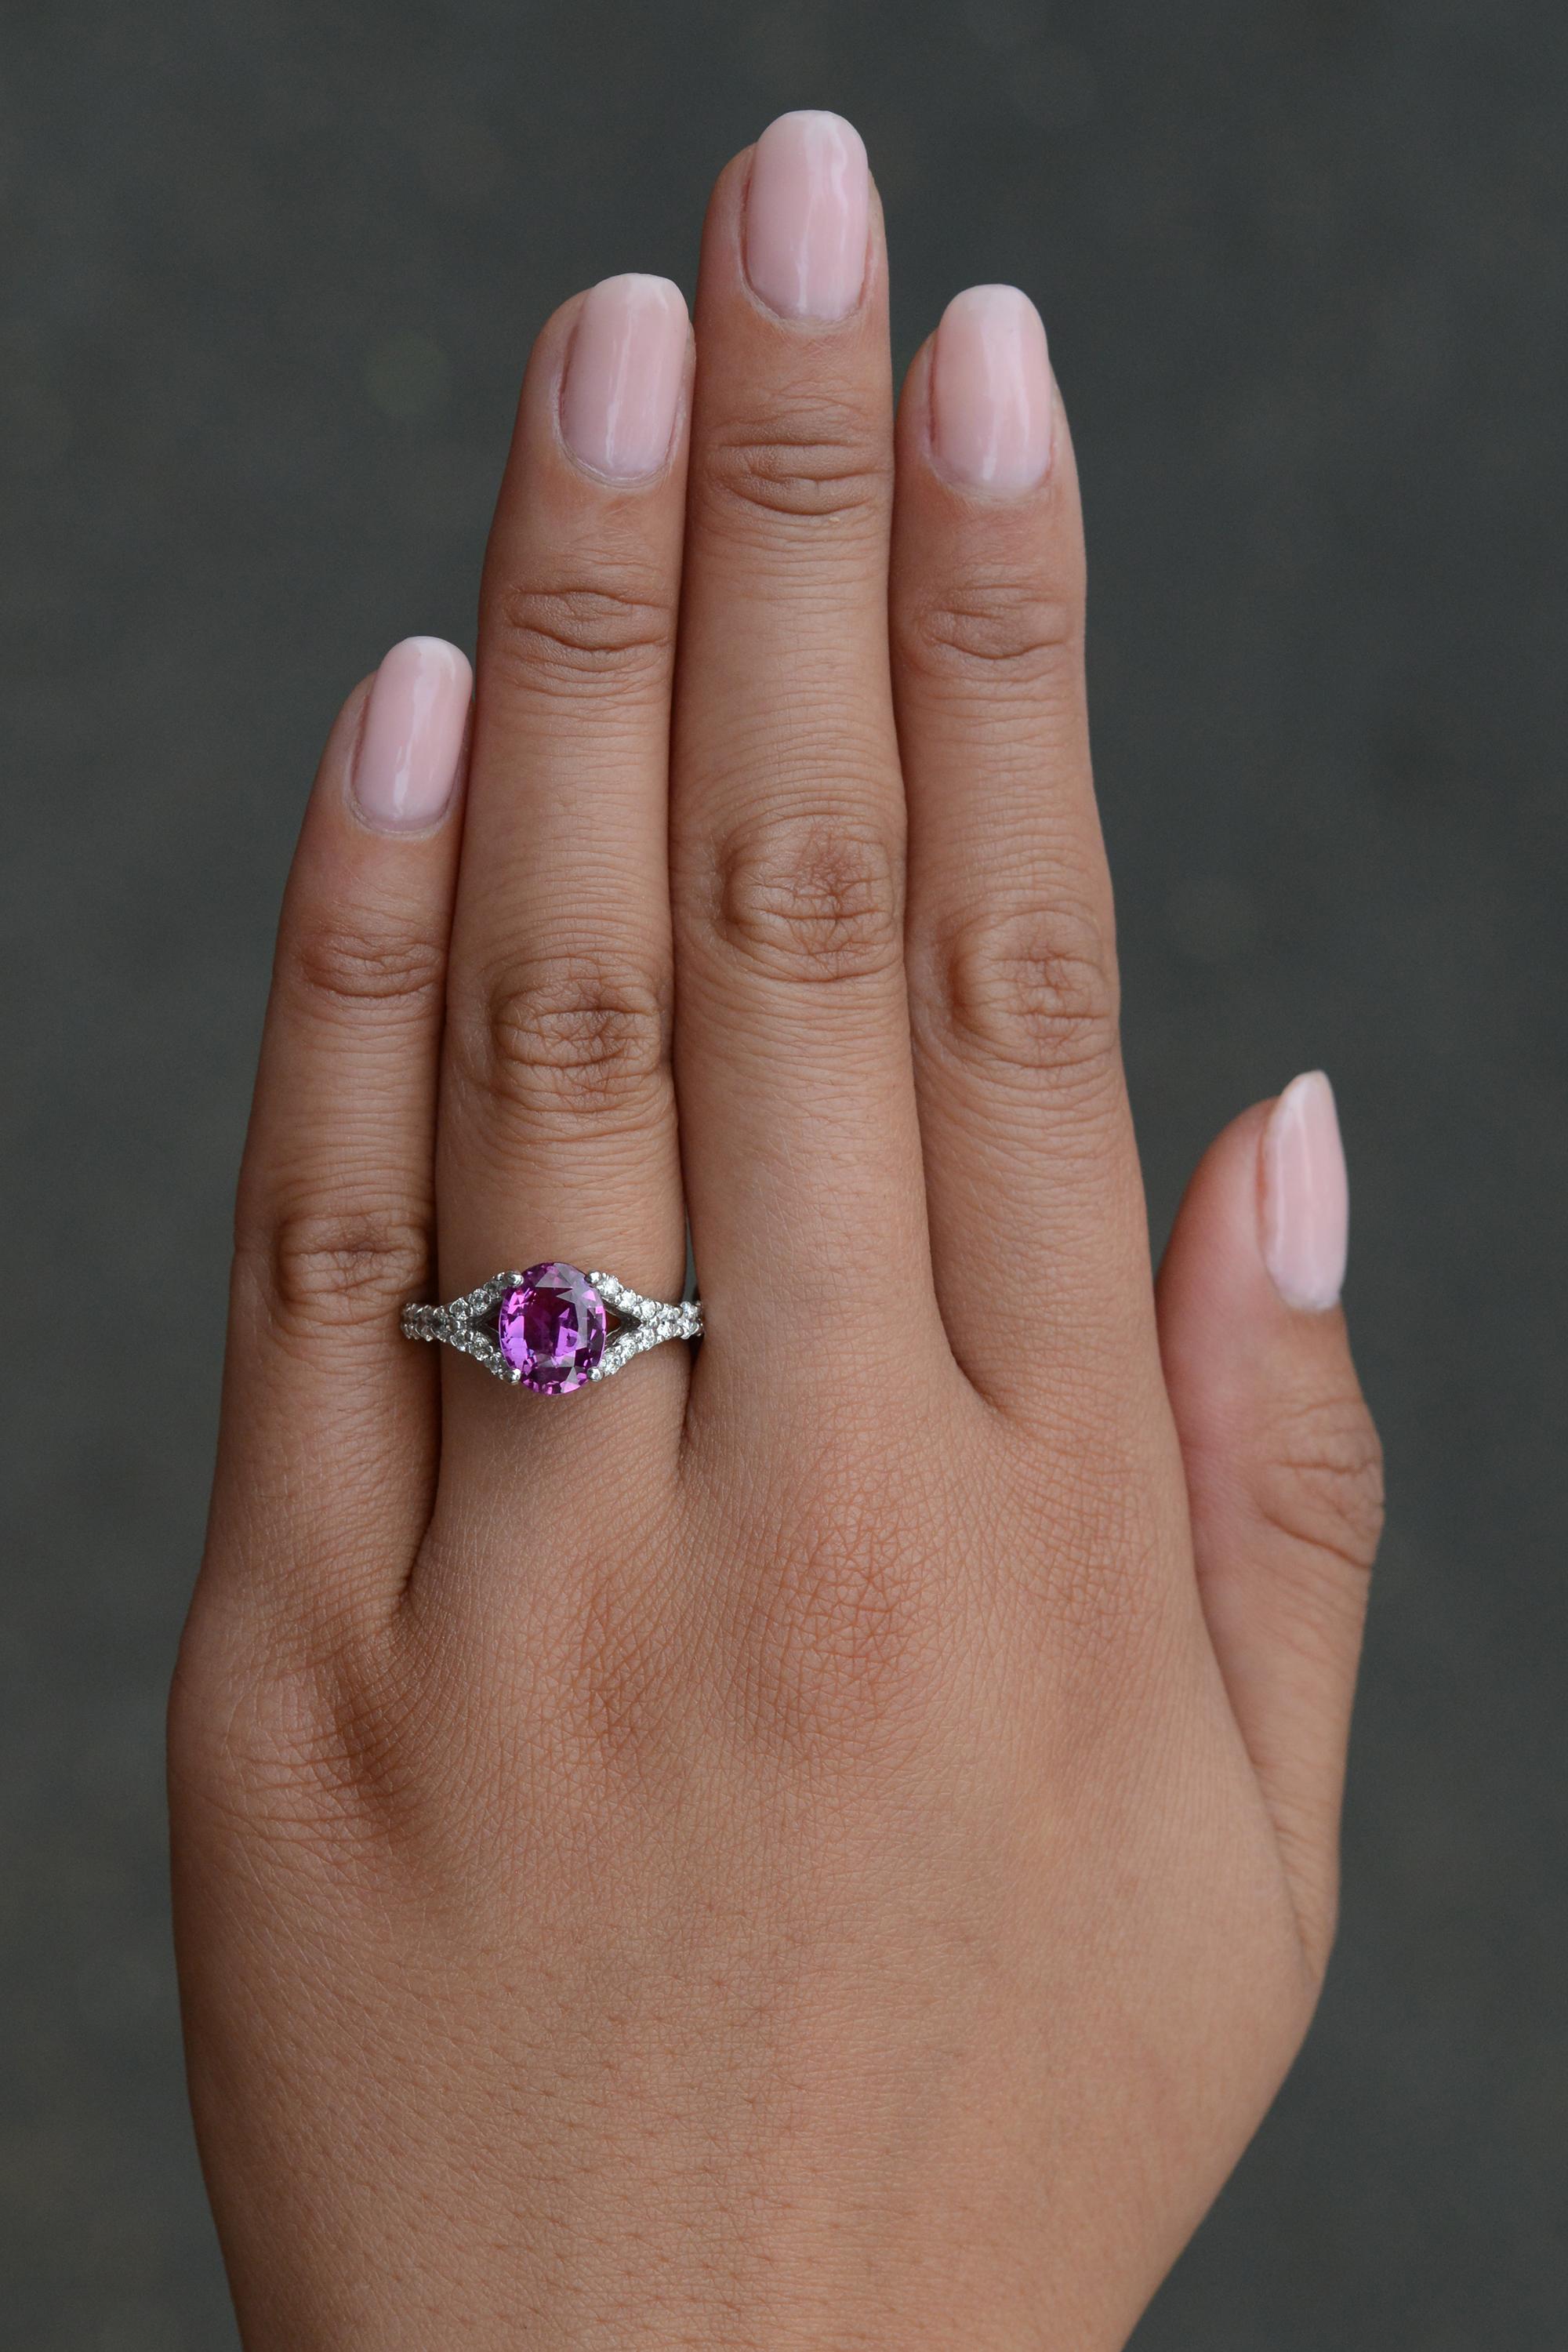 The vivid, bubblegum pink of this natural sapphire glows with an unmistakable luster and brilliance. The gemstone's deep saturation of color offers a striking contrast when paired with the fiery sparkle of the double diamond band, forming a wishbone